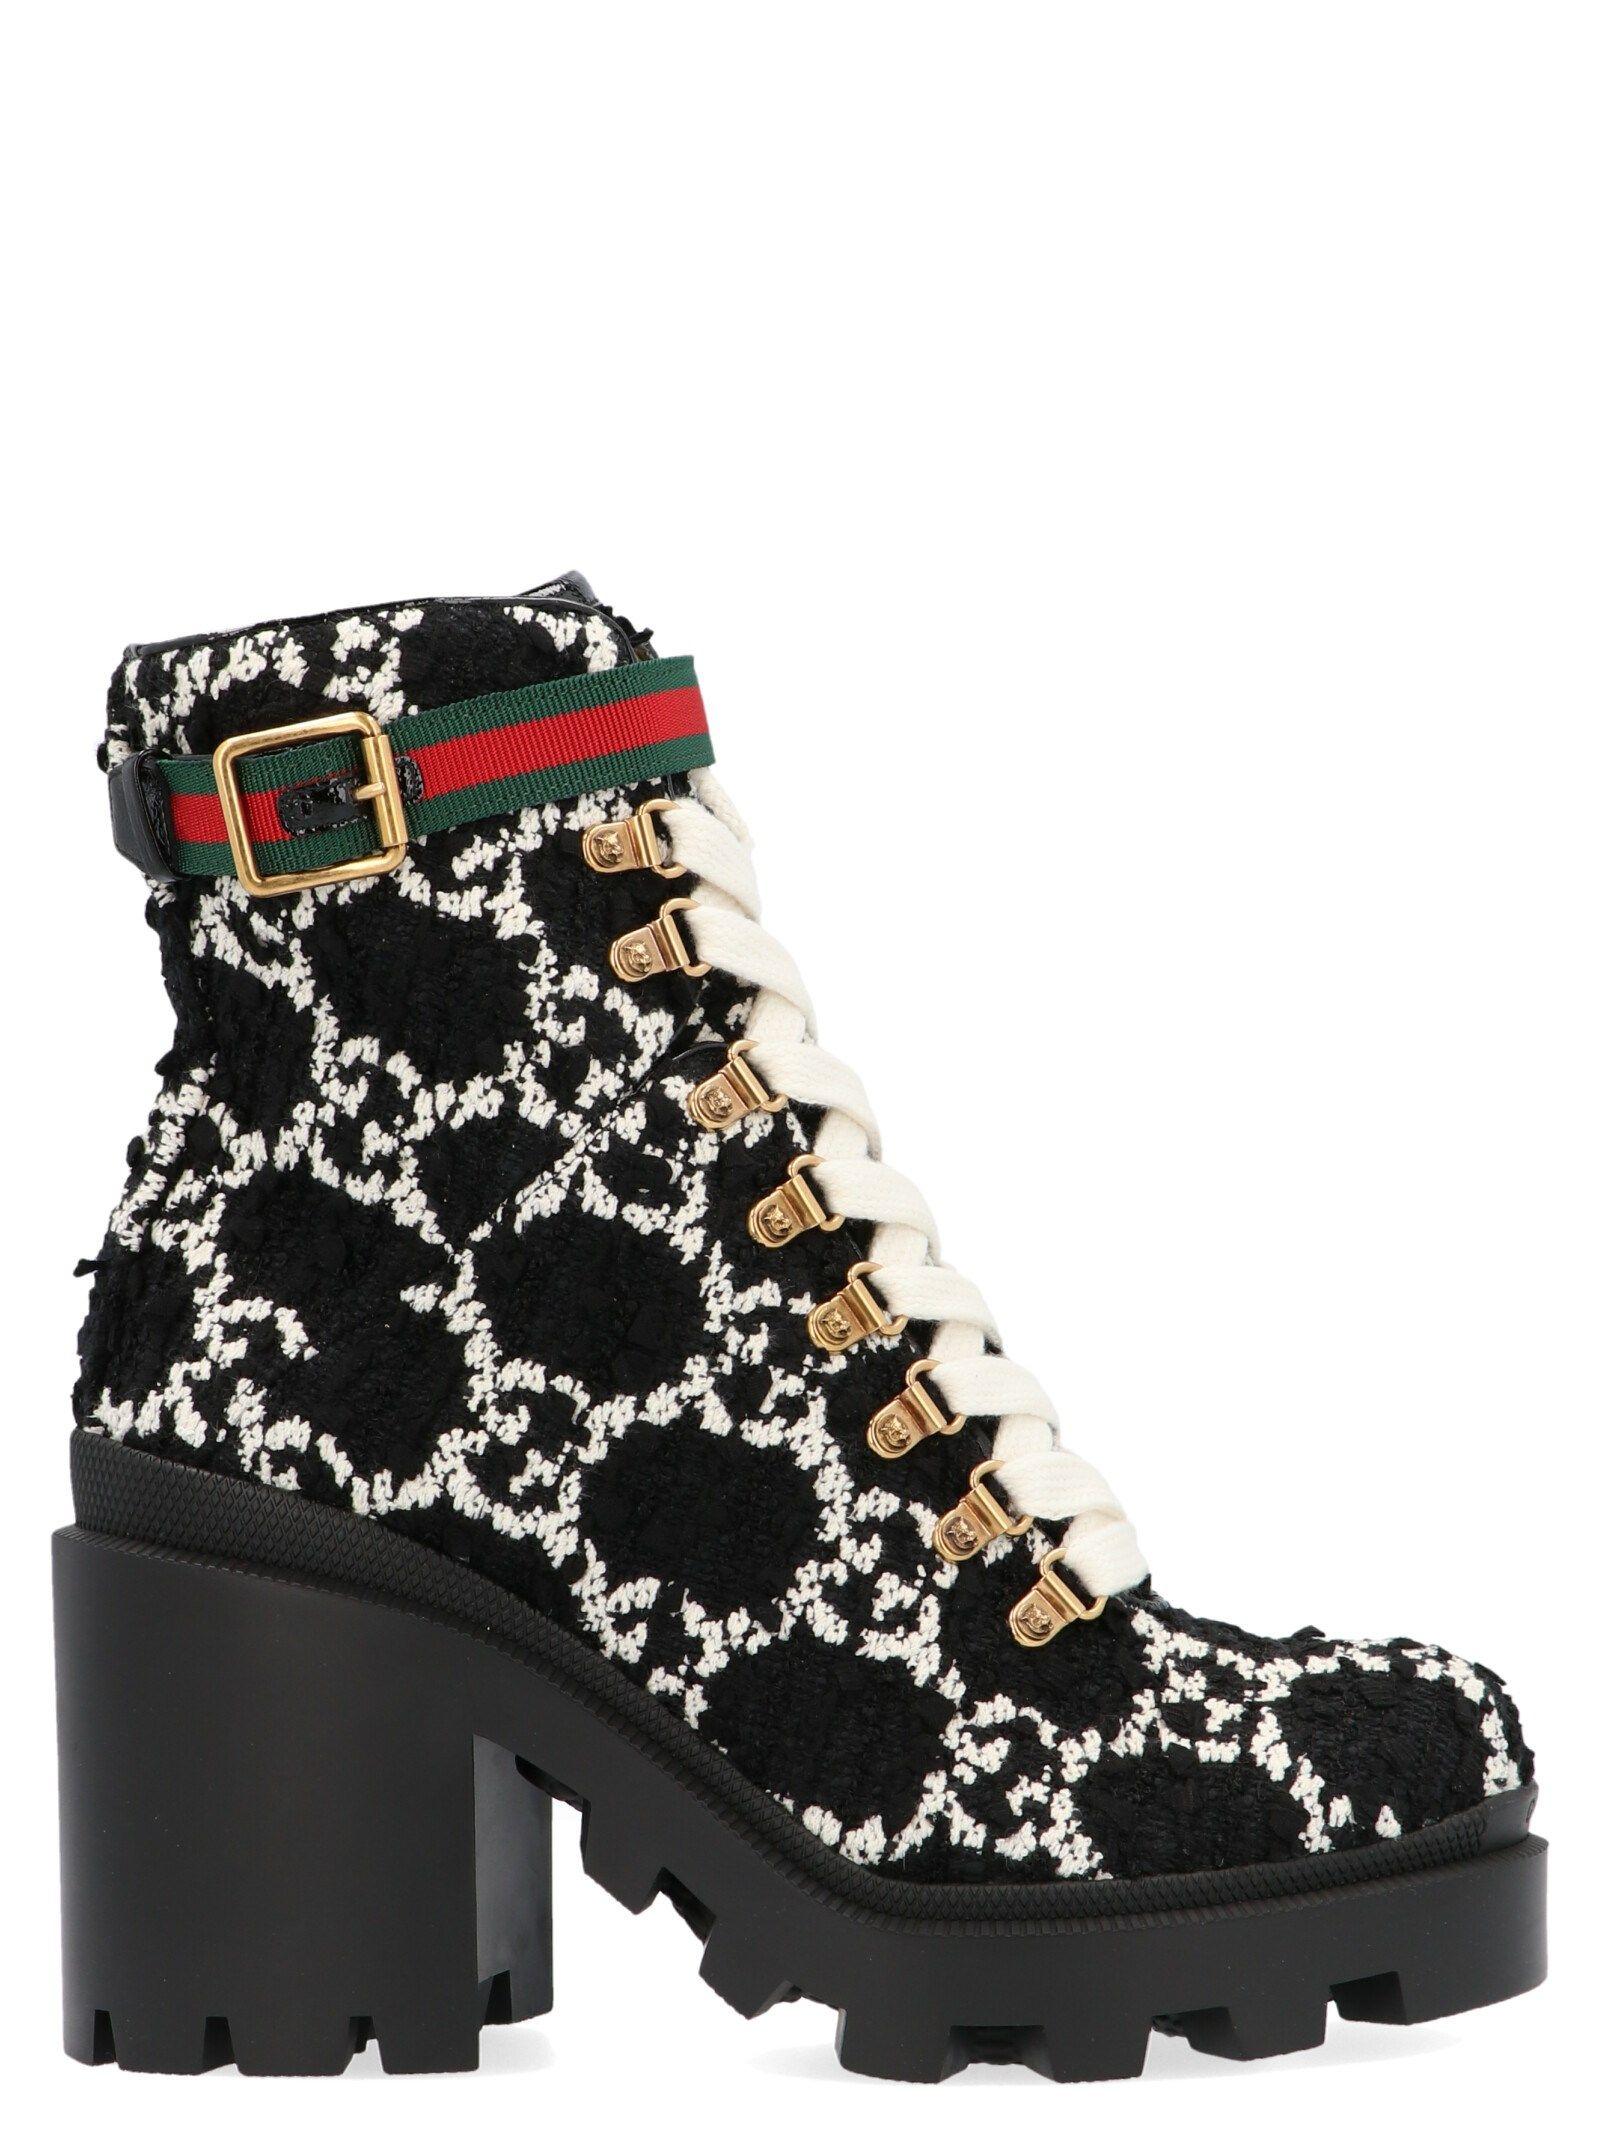 Gucci Black Boots Online Sale, UP TO 70% OFF